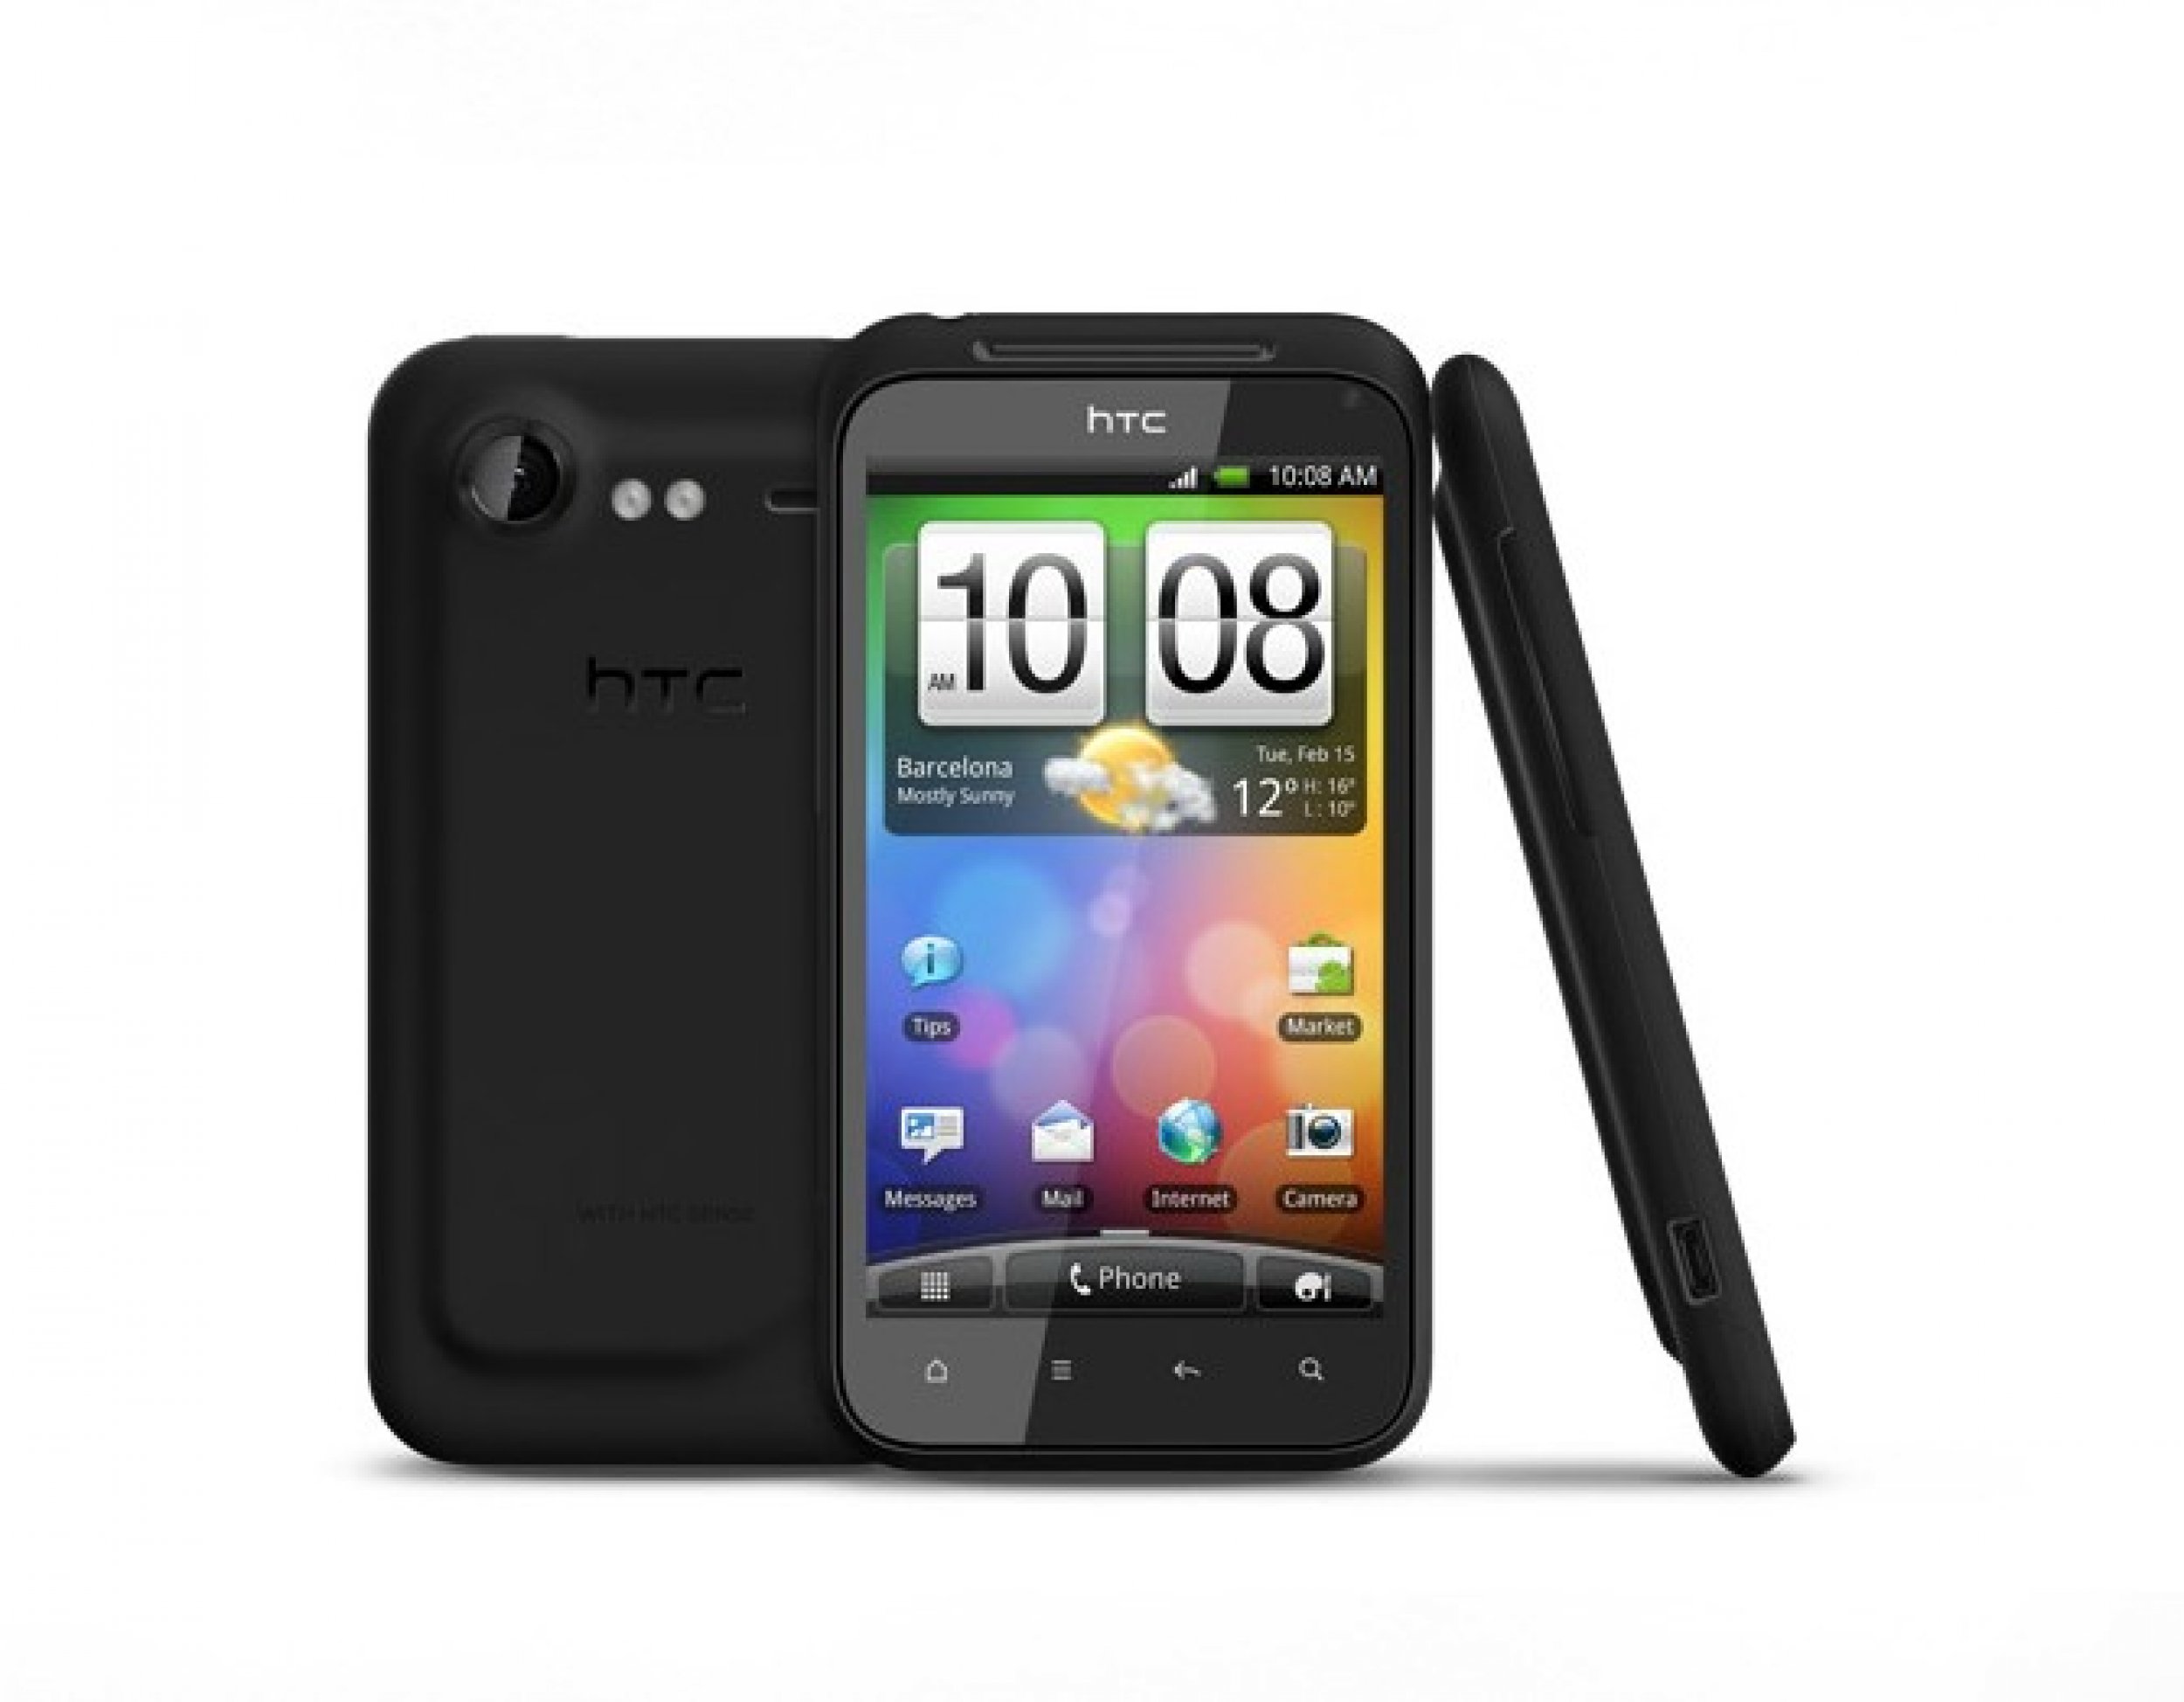 HTC Incredible SDroid Incredible 2